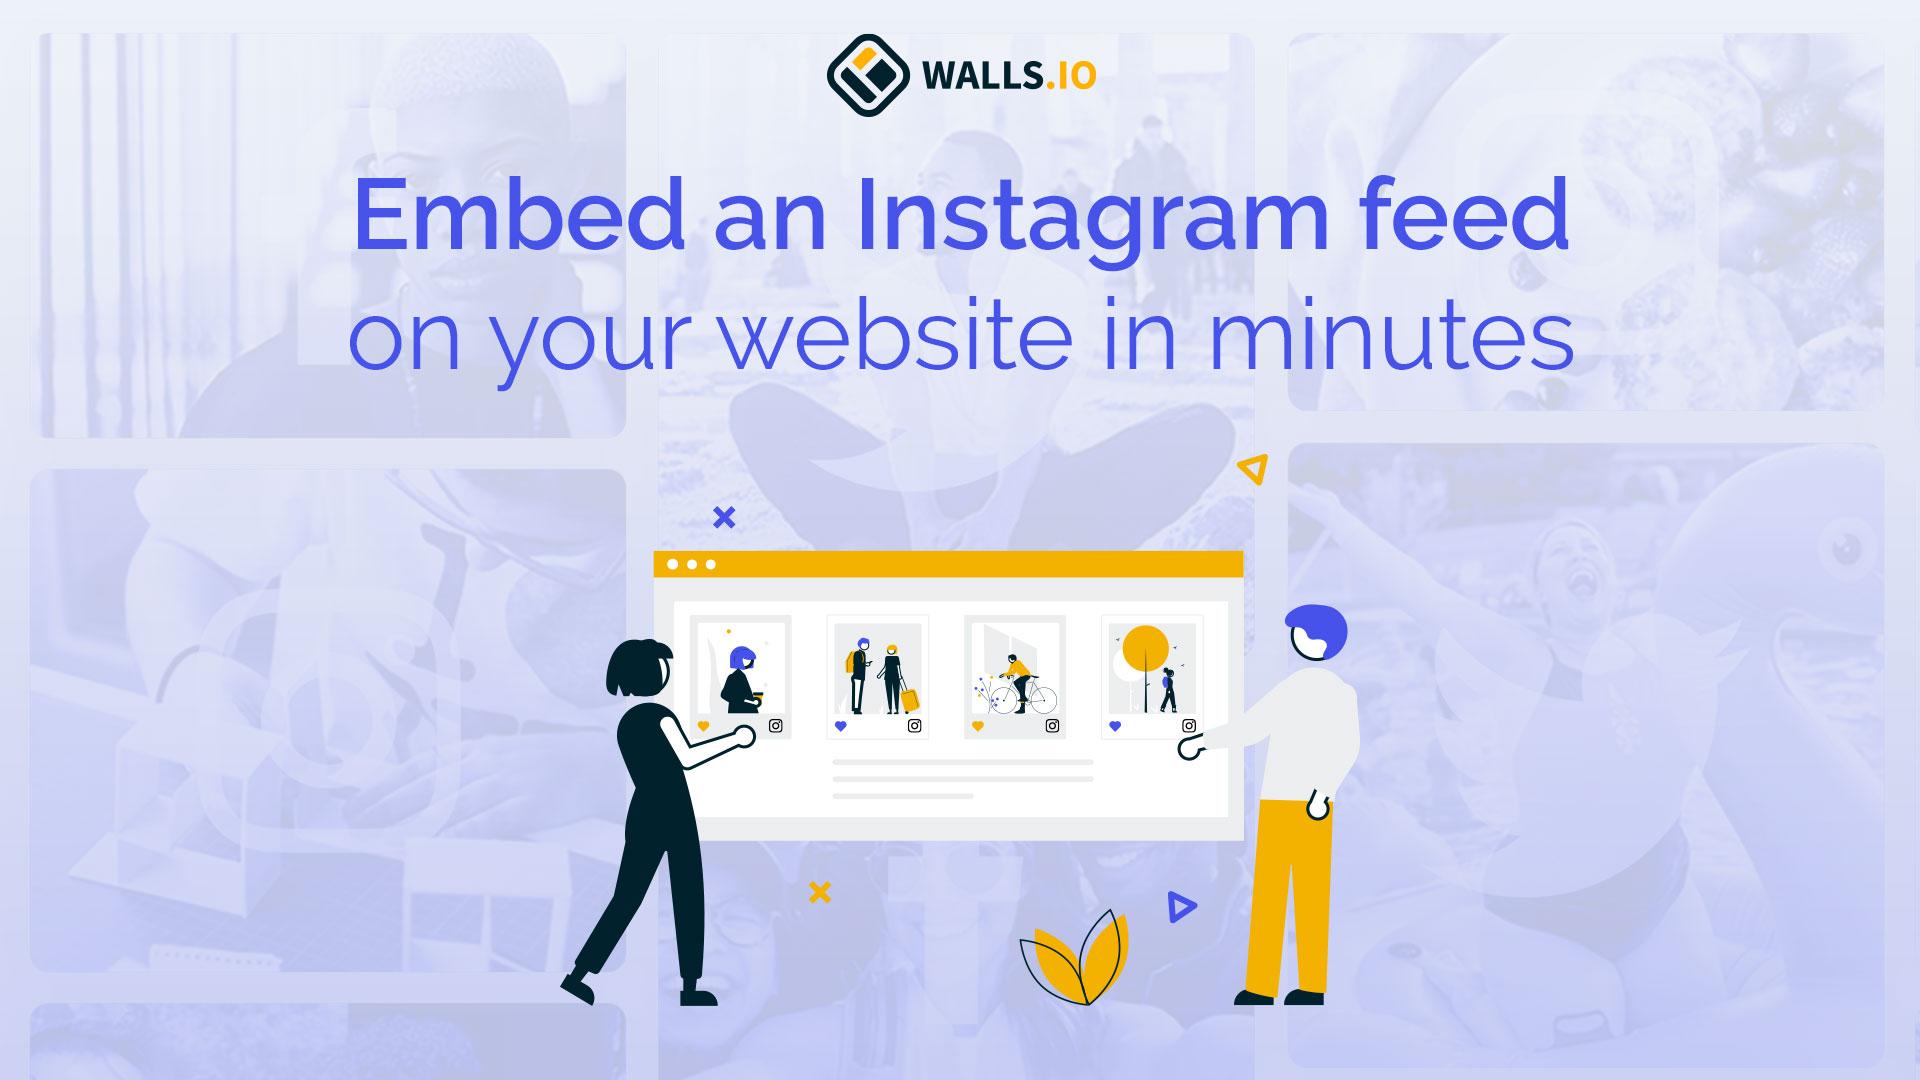 Product: Create an Instagram Wall for Your Website or Live Display in Minutes